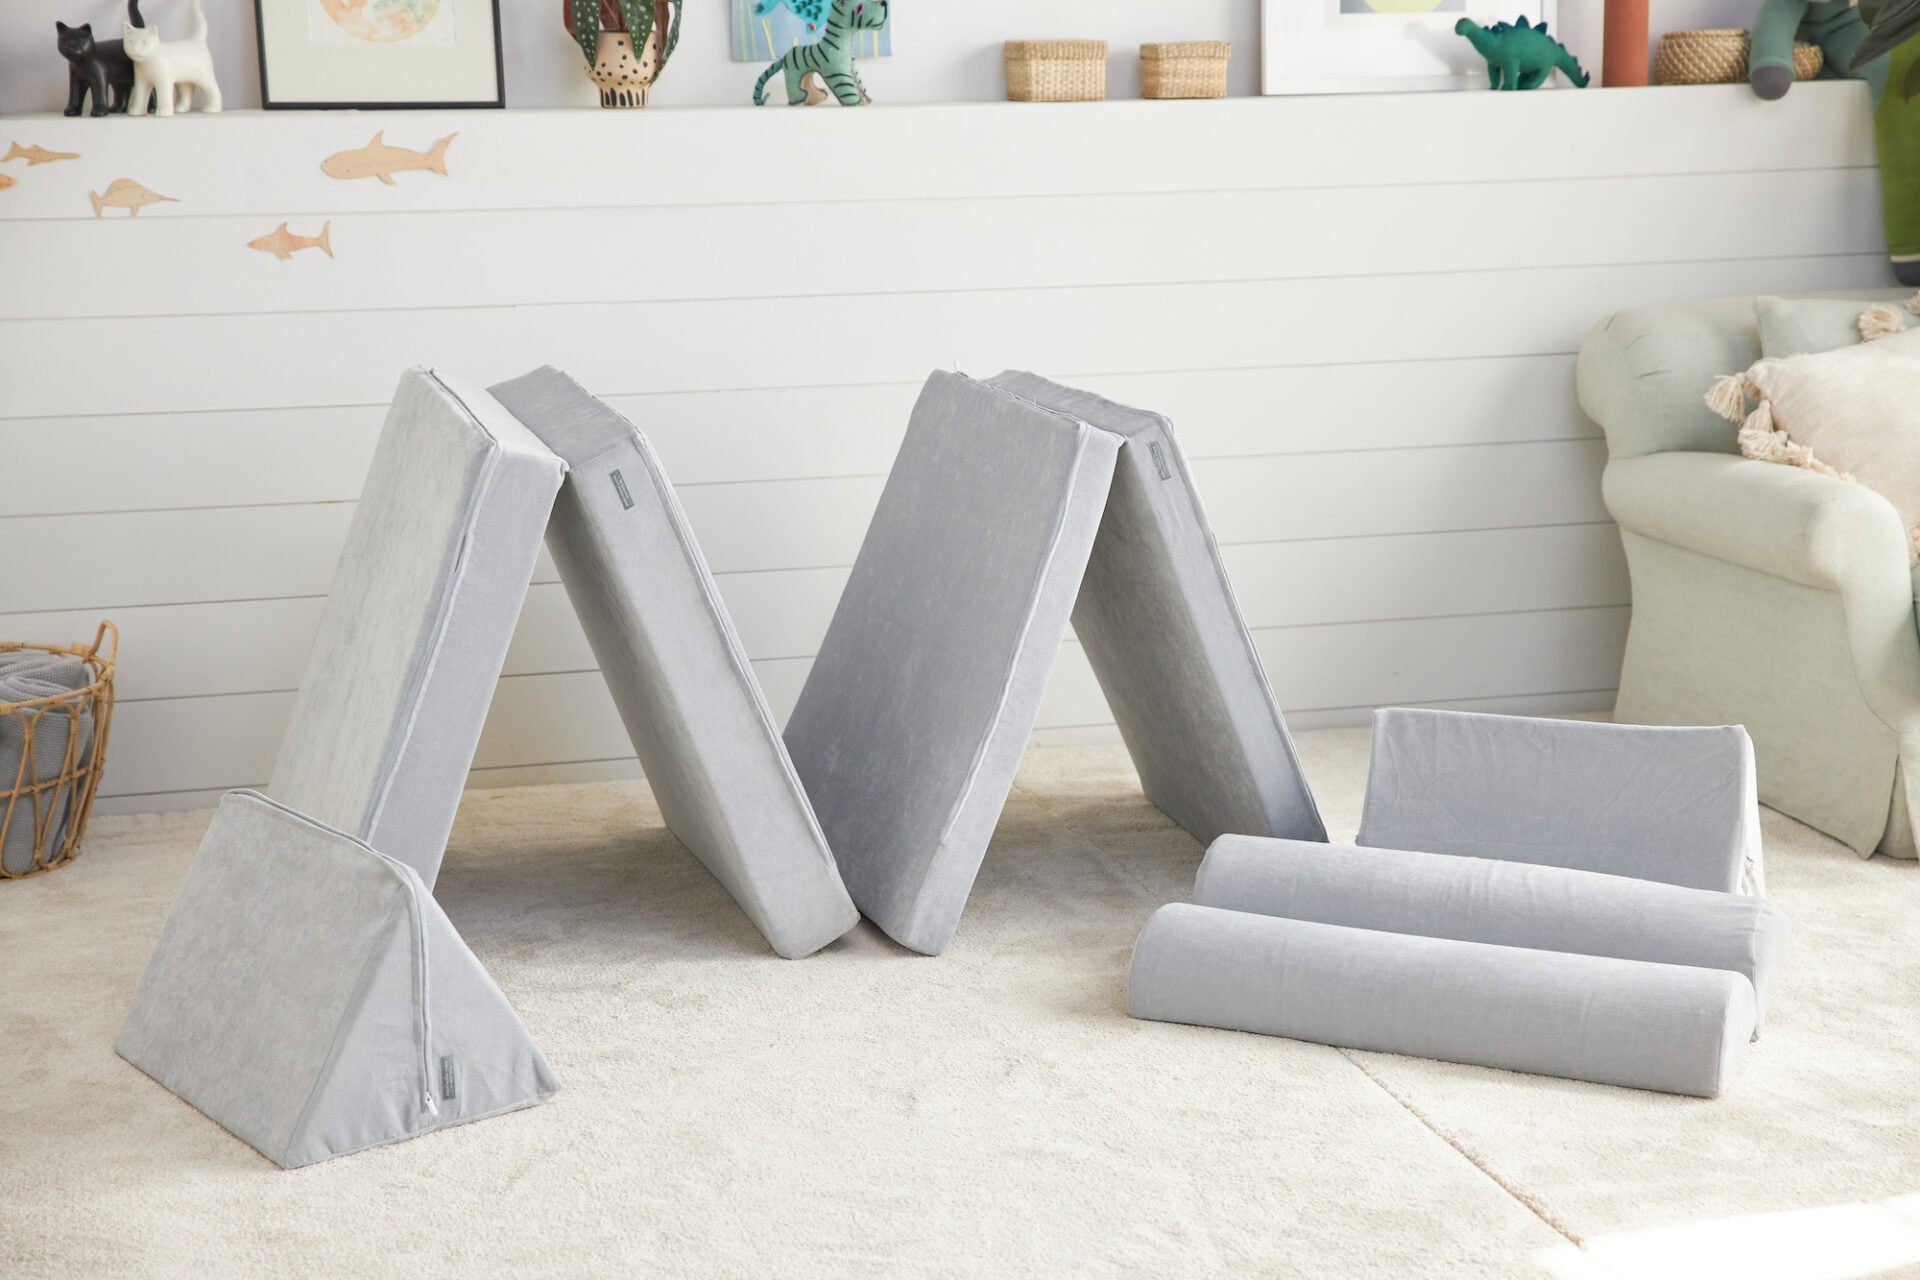 gray foam modular play couches in a living room